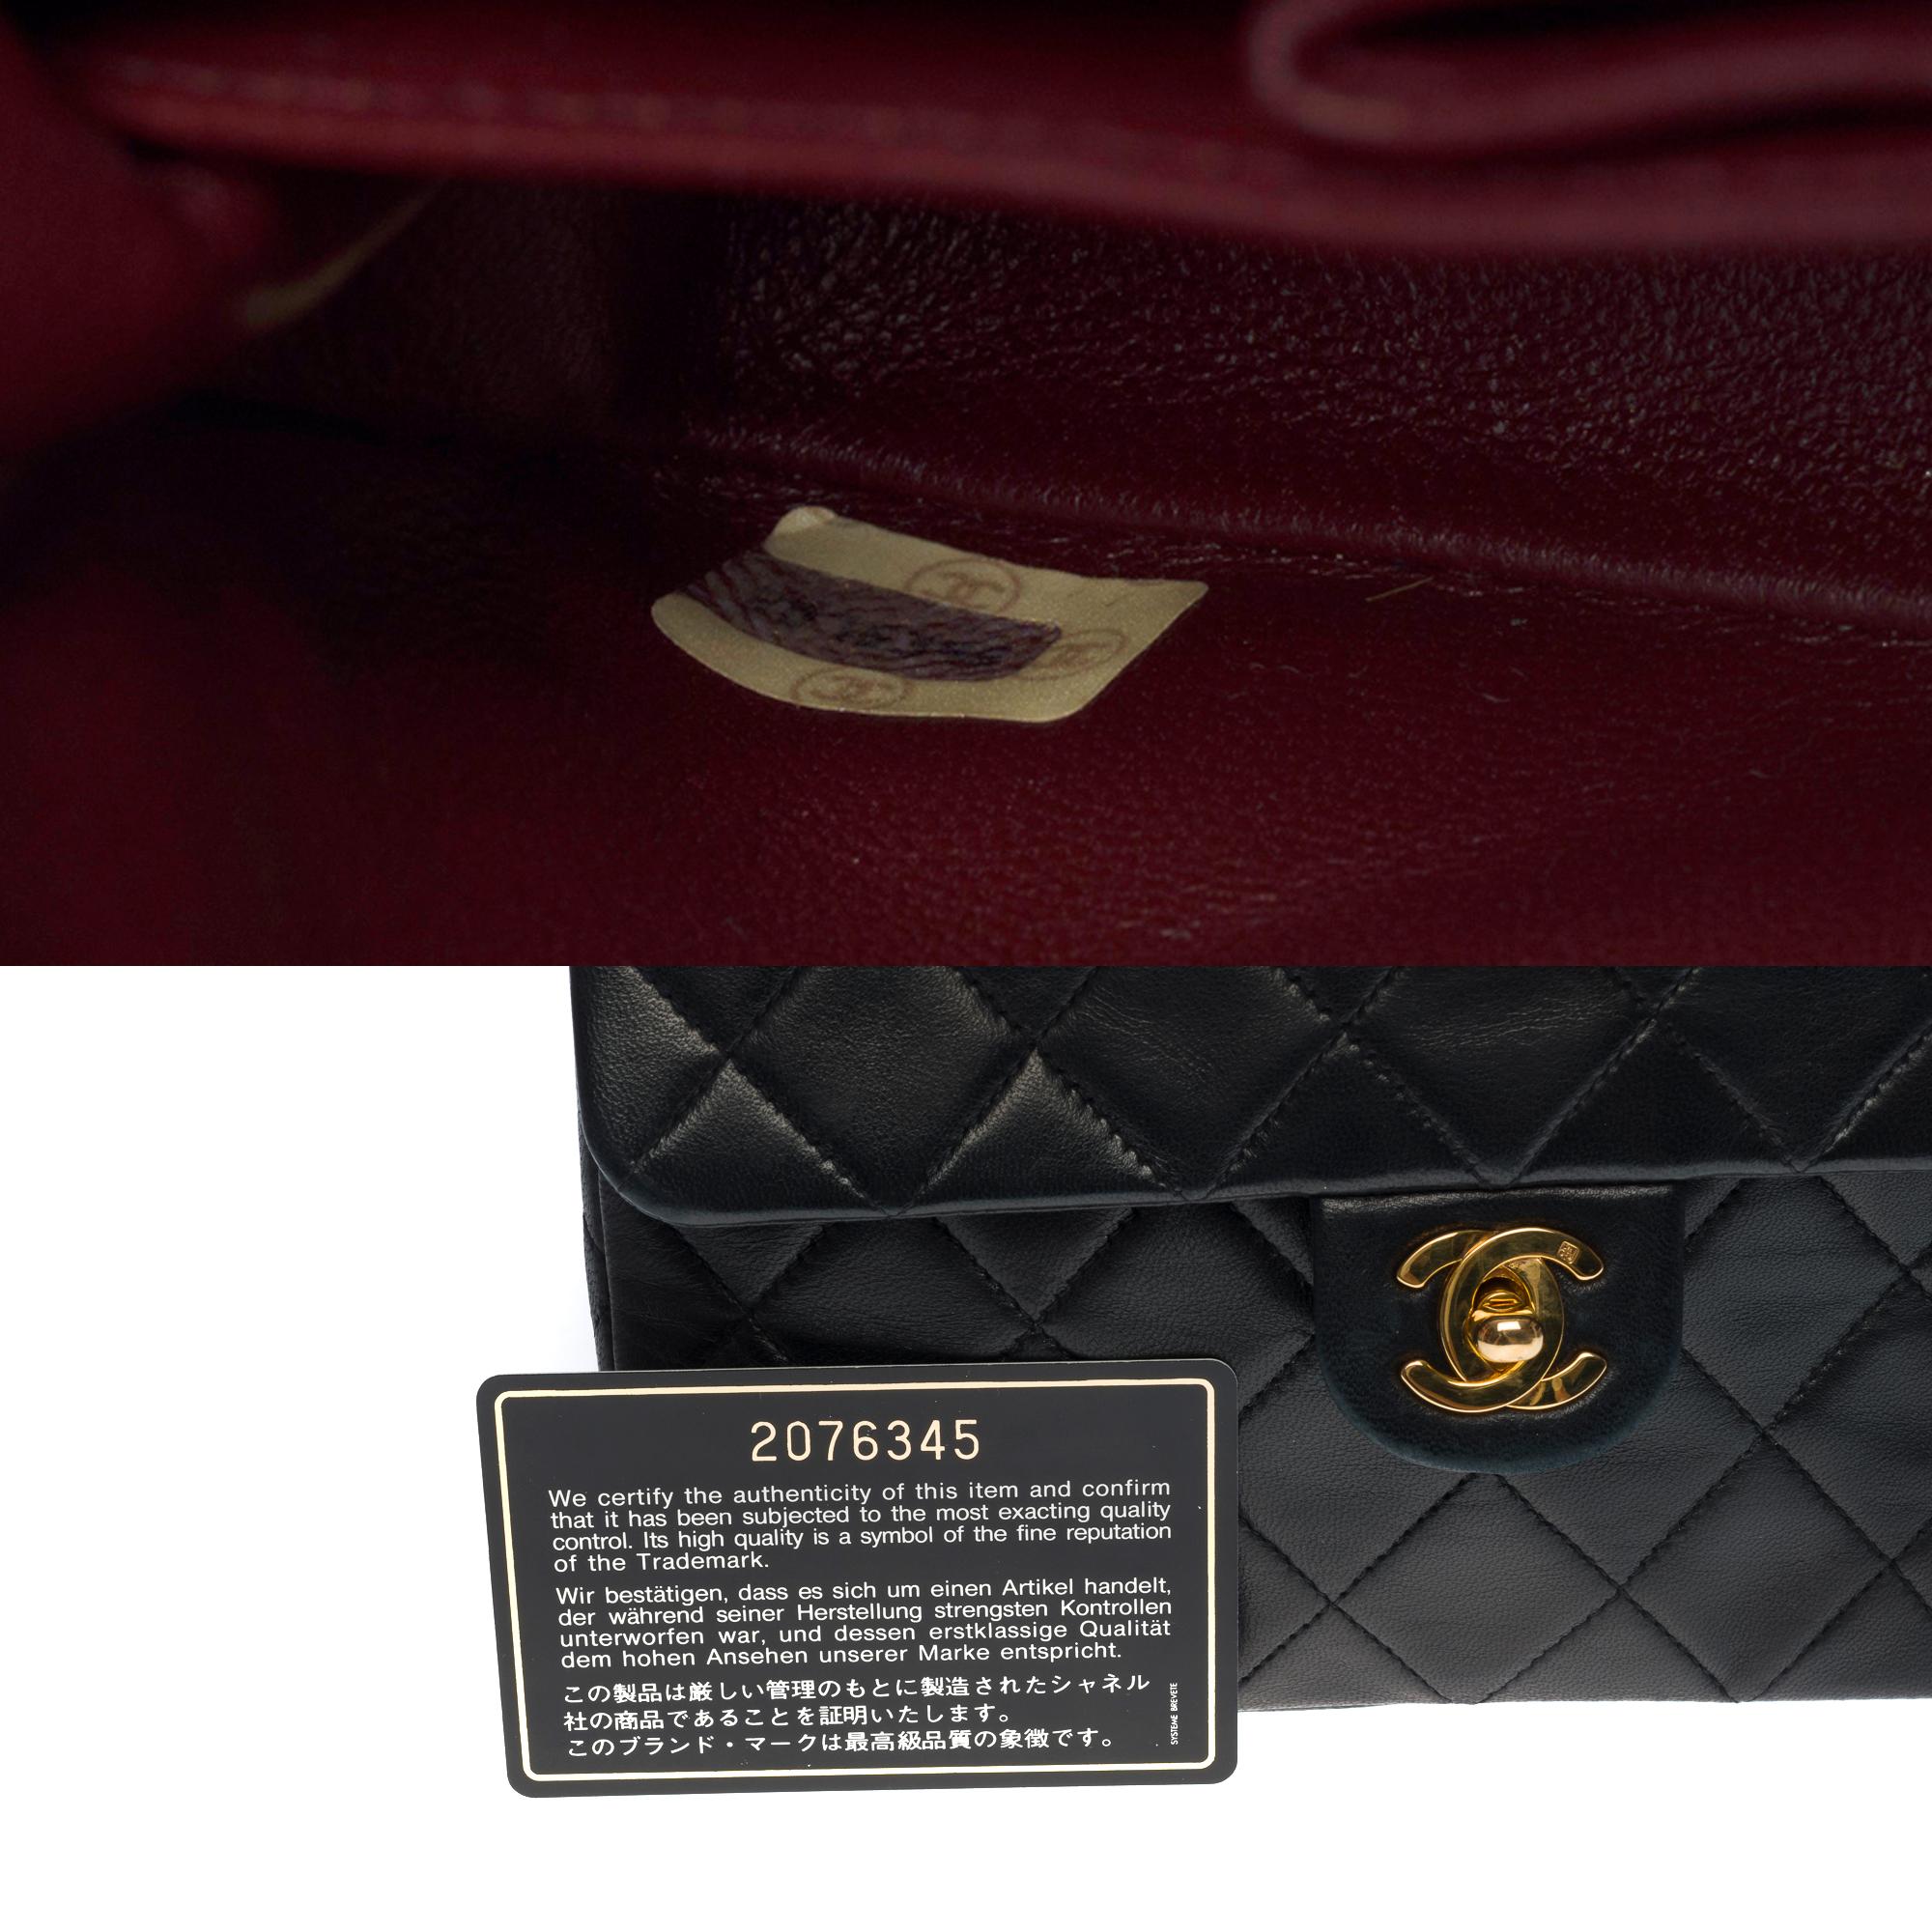 Chanel Timeless Mini Square Flap shoulder bag in black quilted lambskin, GHW 2